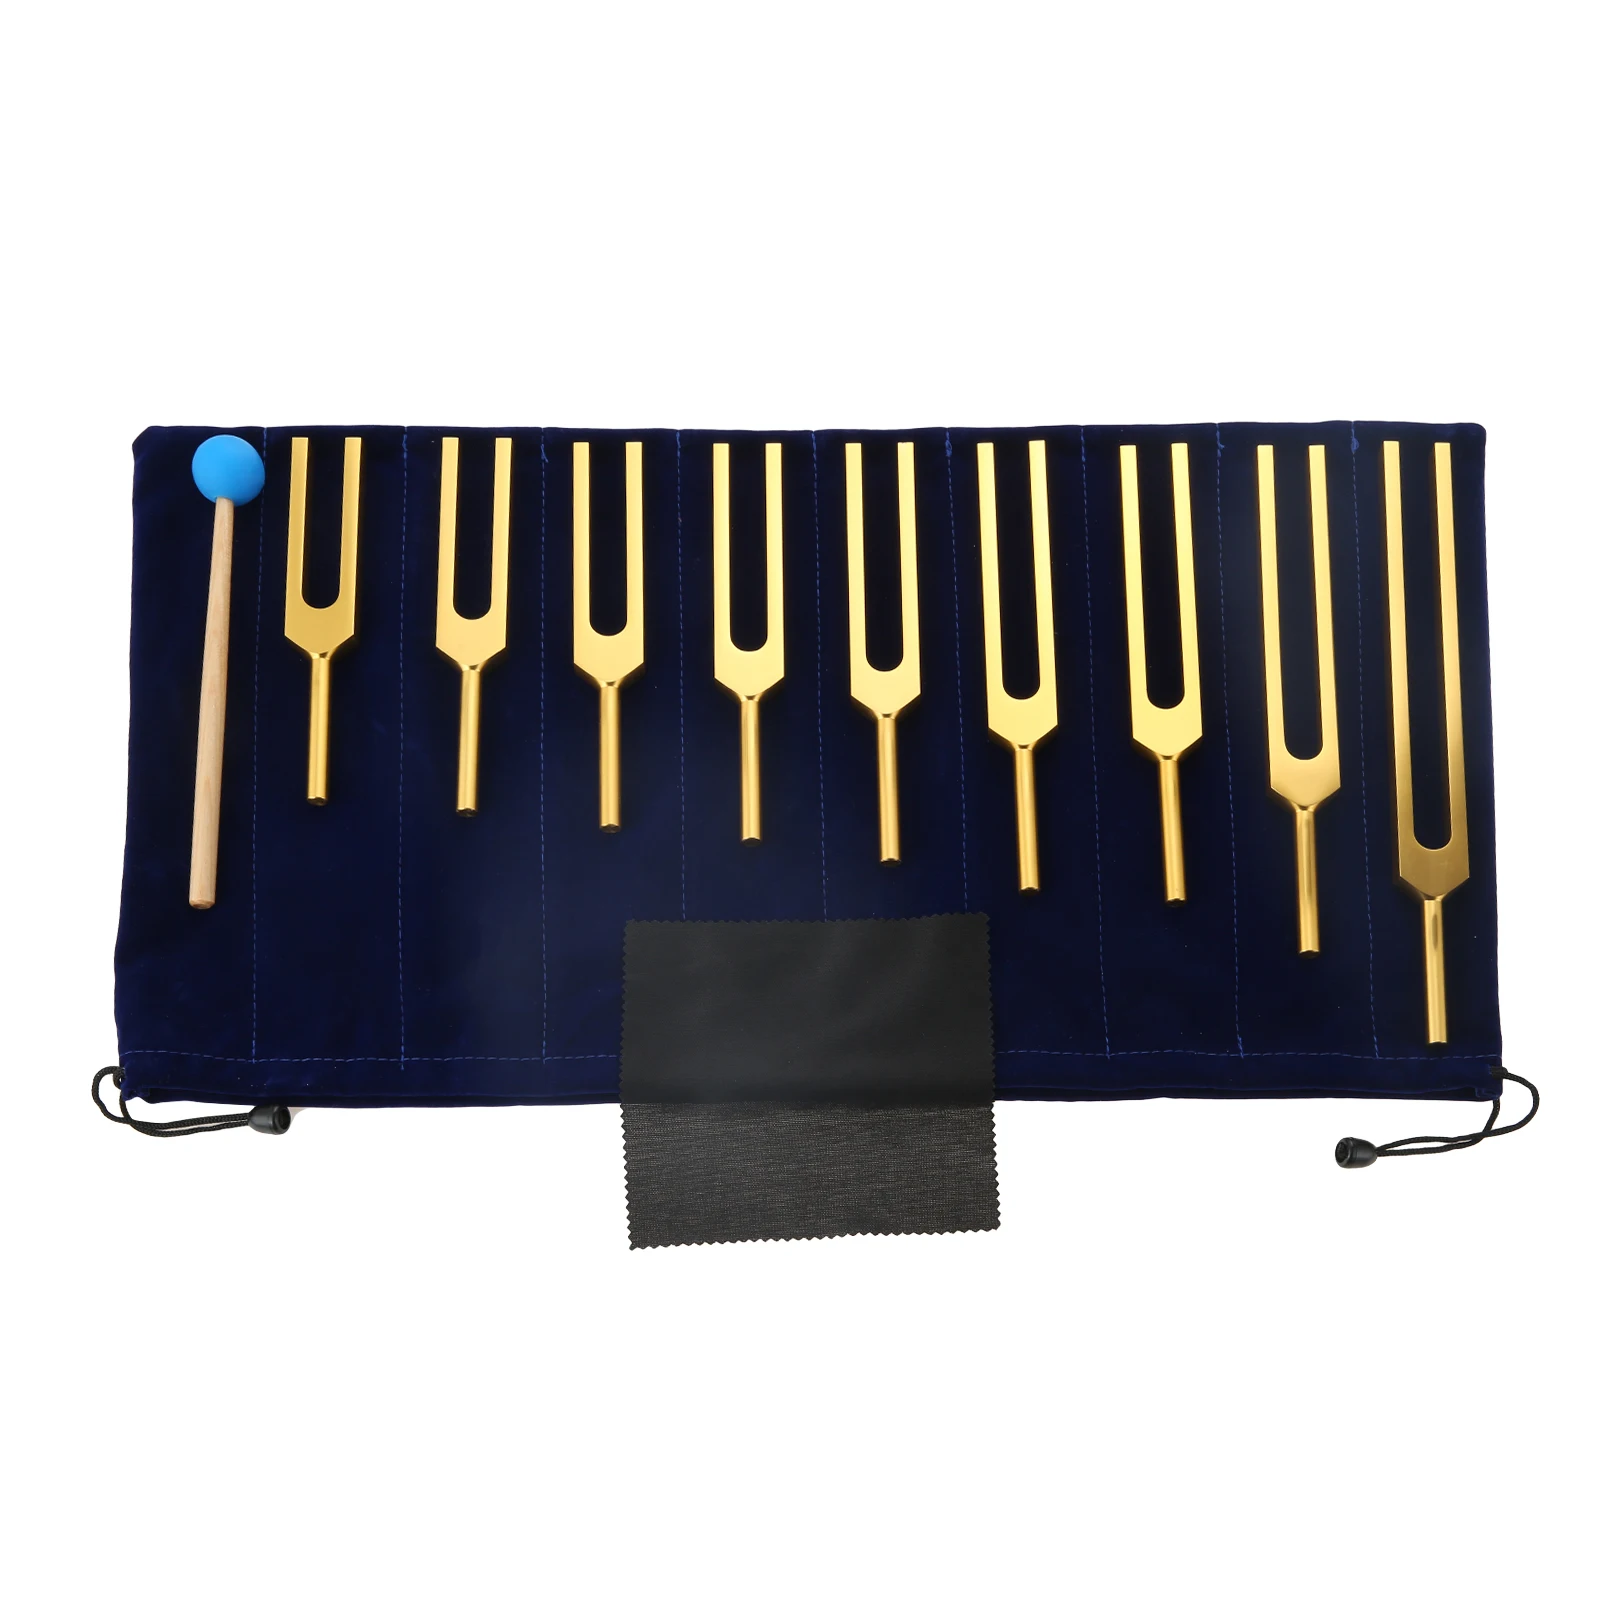 

9pcs/1kit Golden Tuning Forks Silicone Hammer Bag 174 Hz 285 Hz 396 Hz 417 Hz 528 Hz 639 Hz 741 Hz 852 Hz 963 Hz Balance Heal